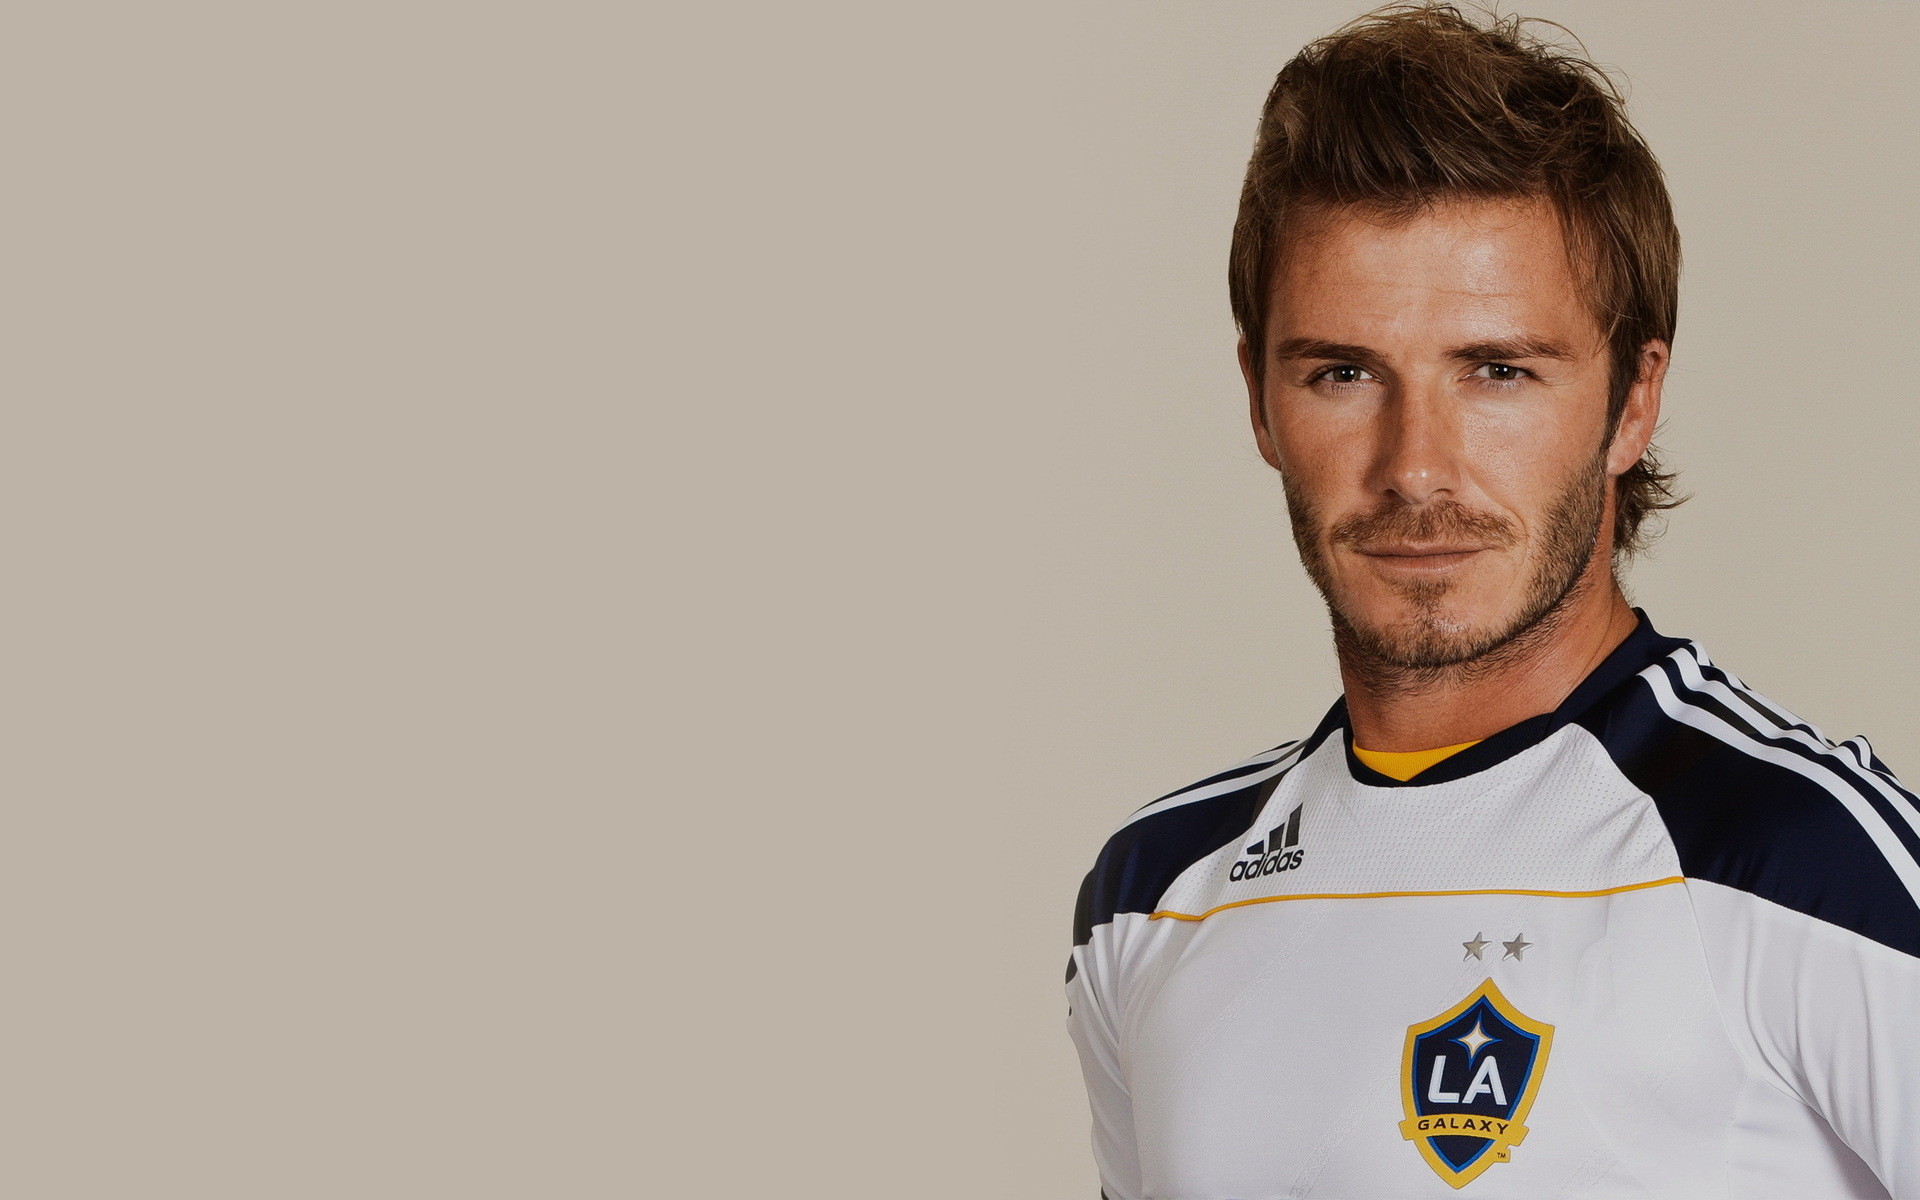 Wallpaper And Background Photos Of David Beckham Cover - David Beckham Graphic - HD Wallpaper 